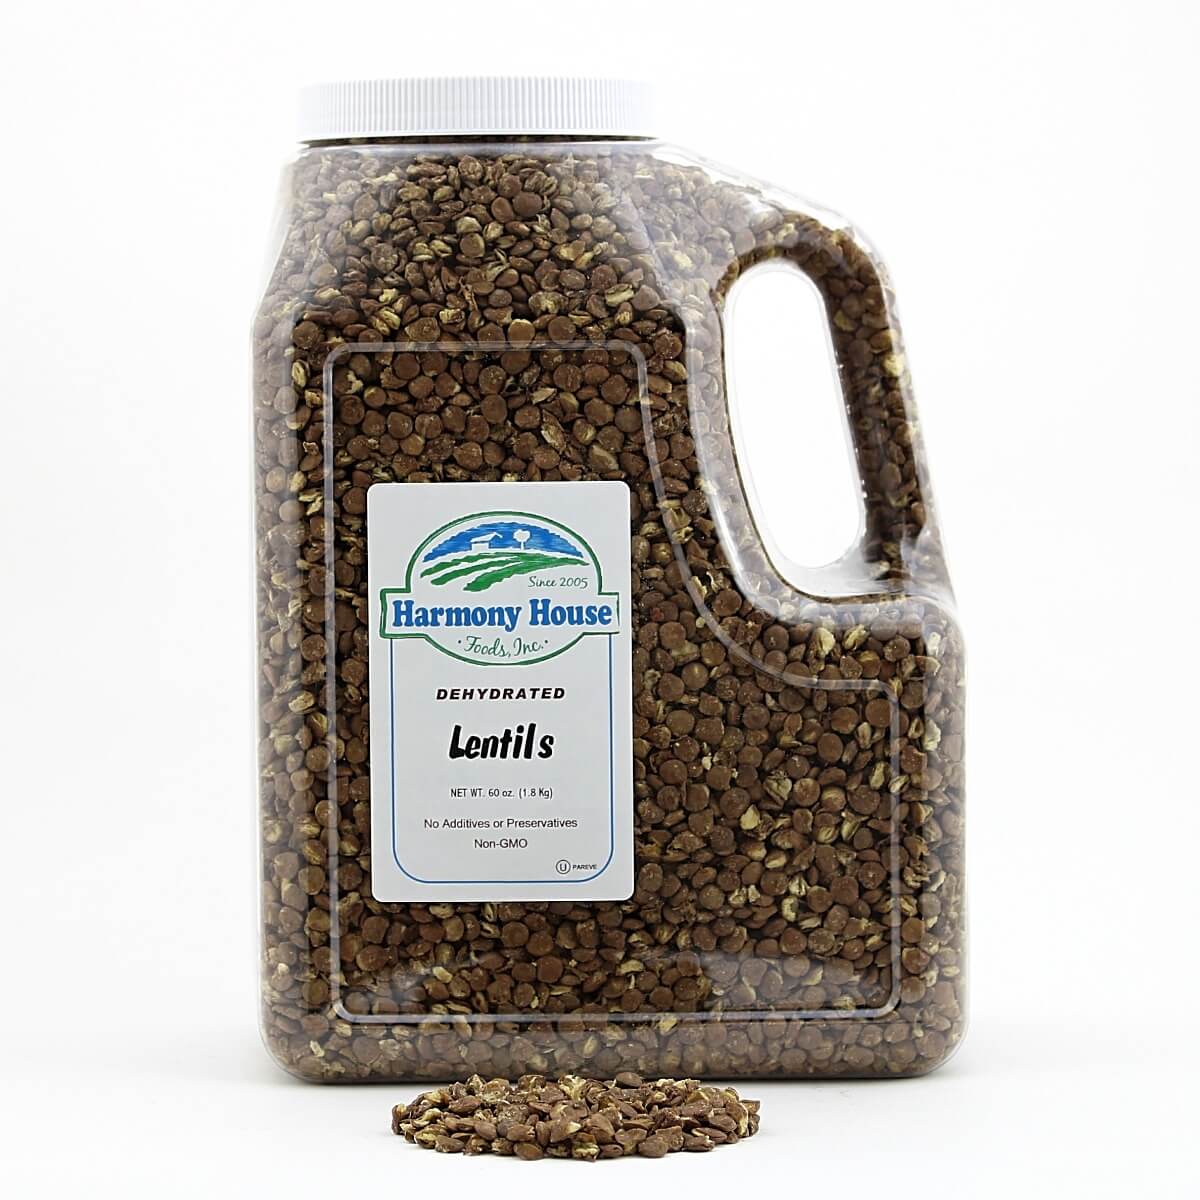 A gallon of Harmony House Lentils on a white background.